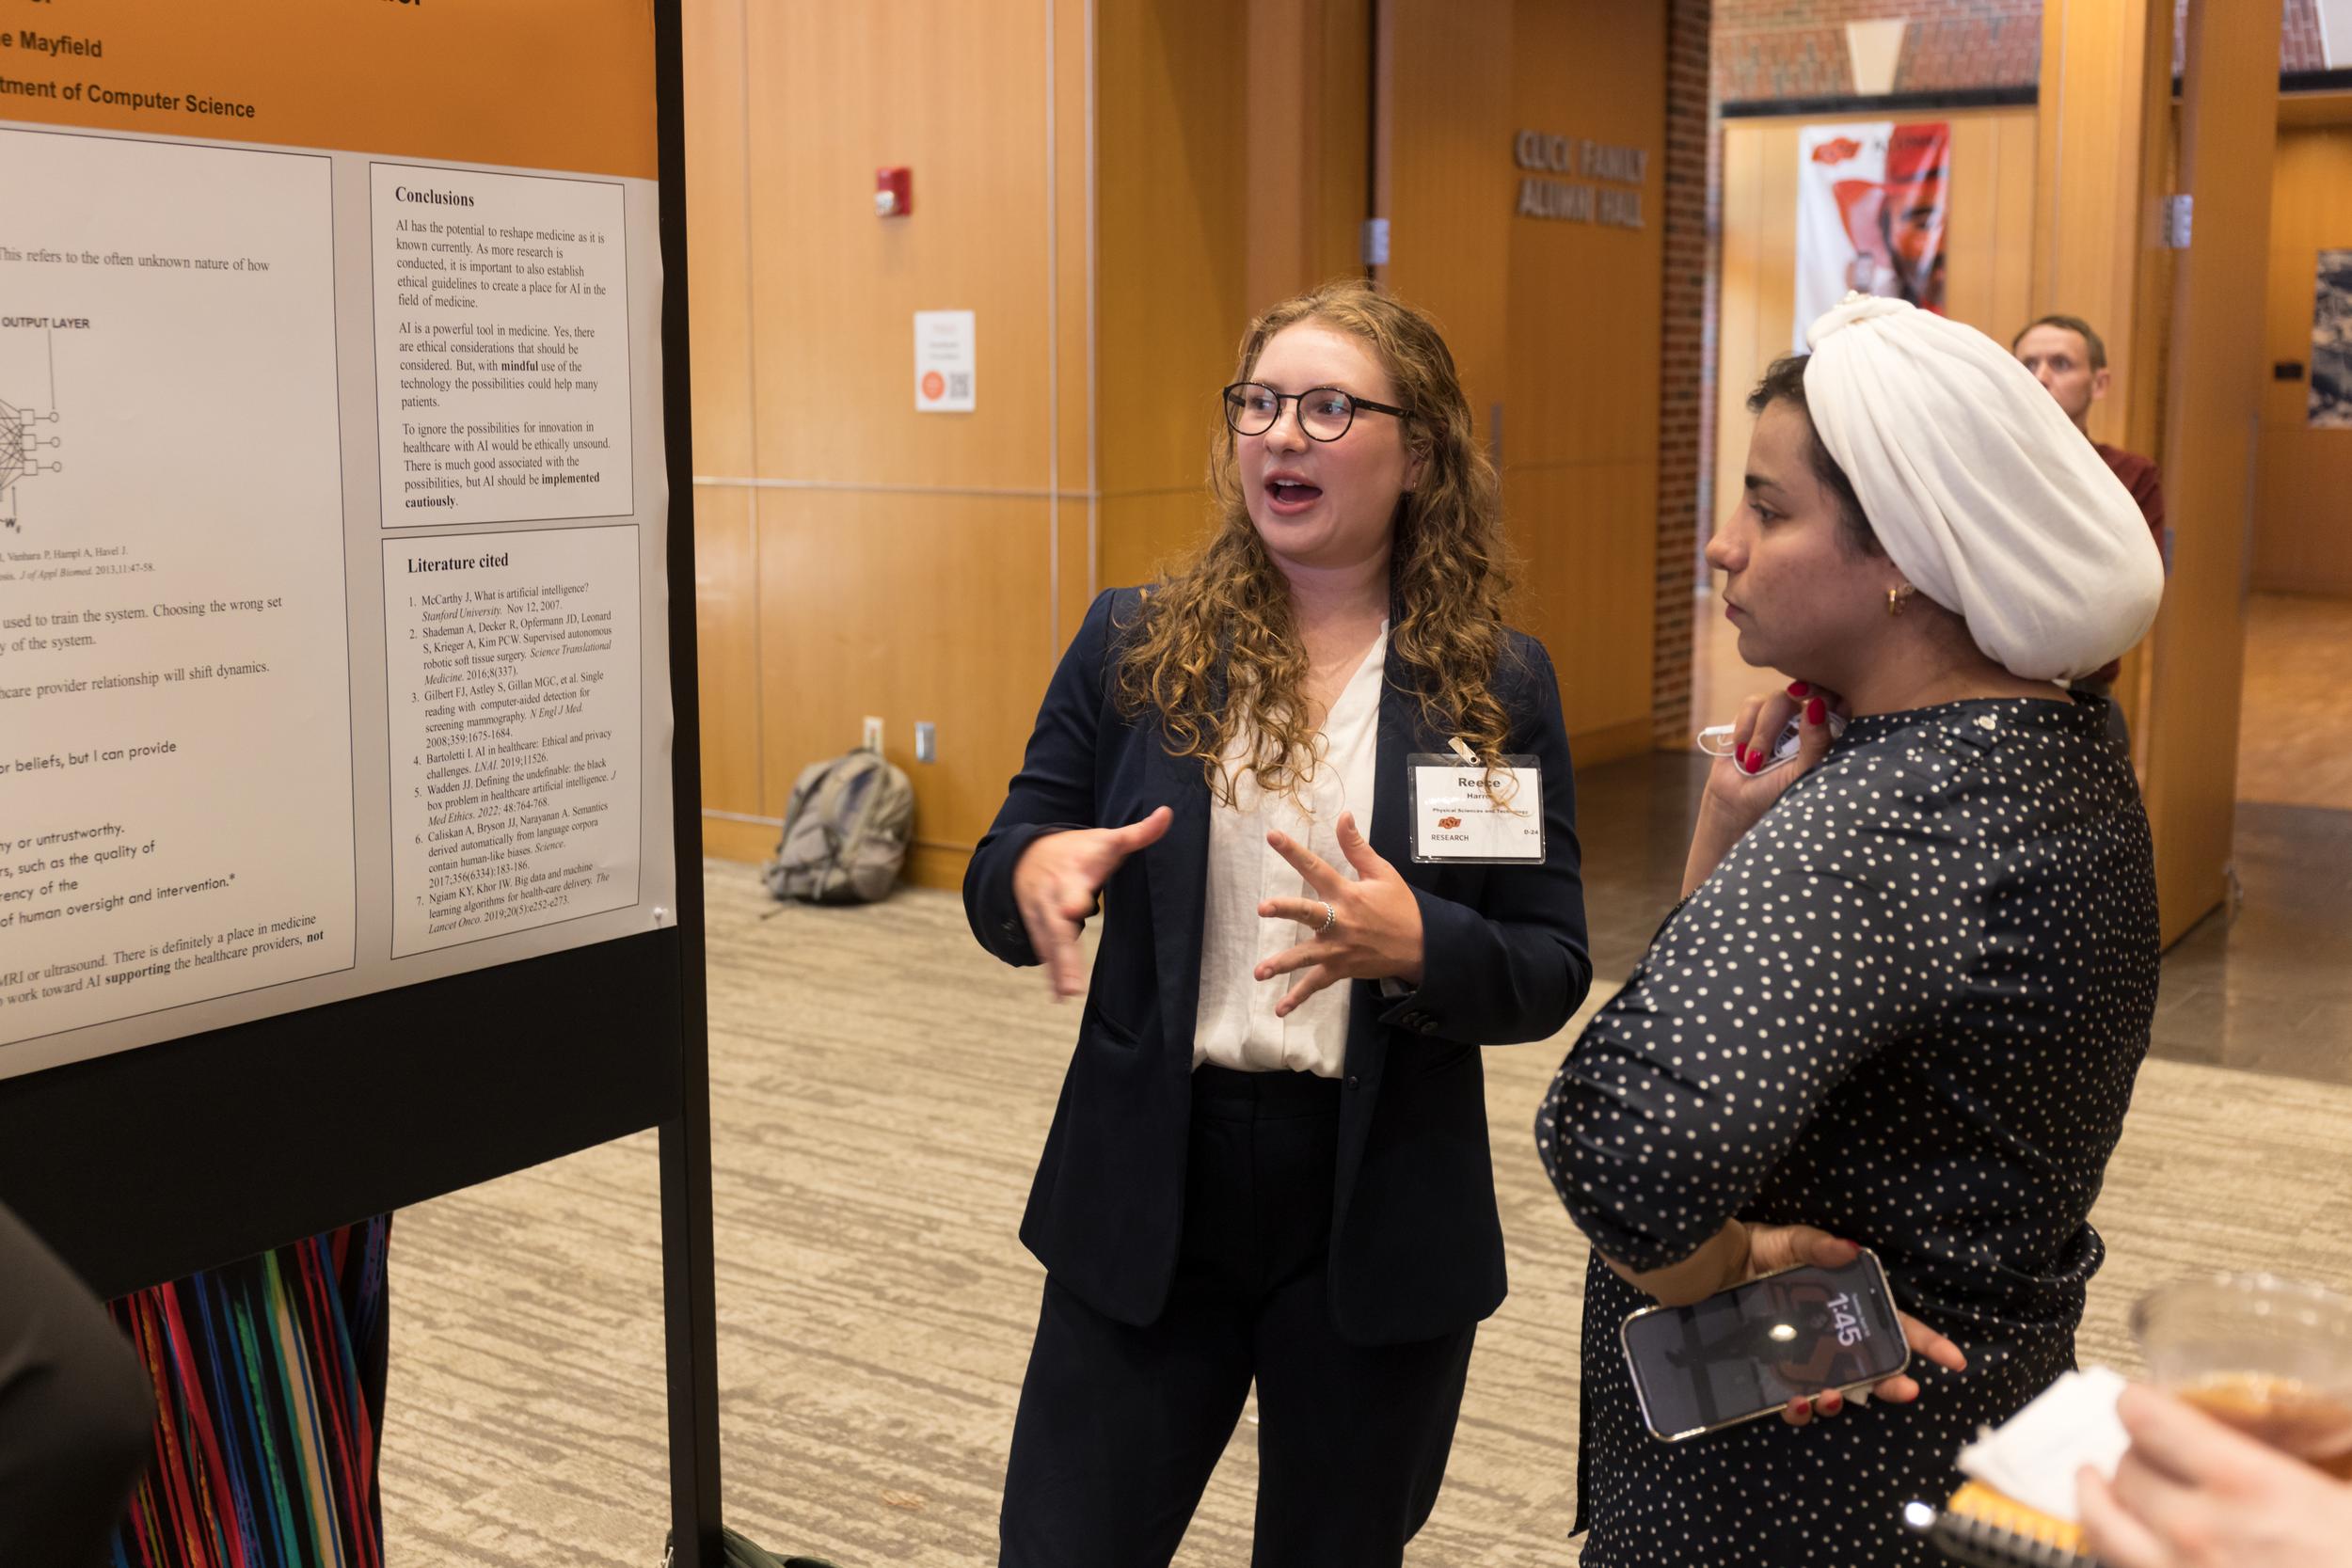 A young female describes her research to another person.